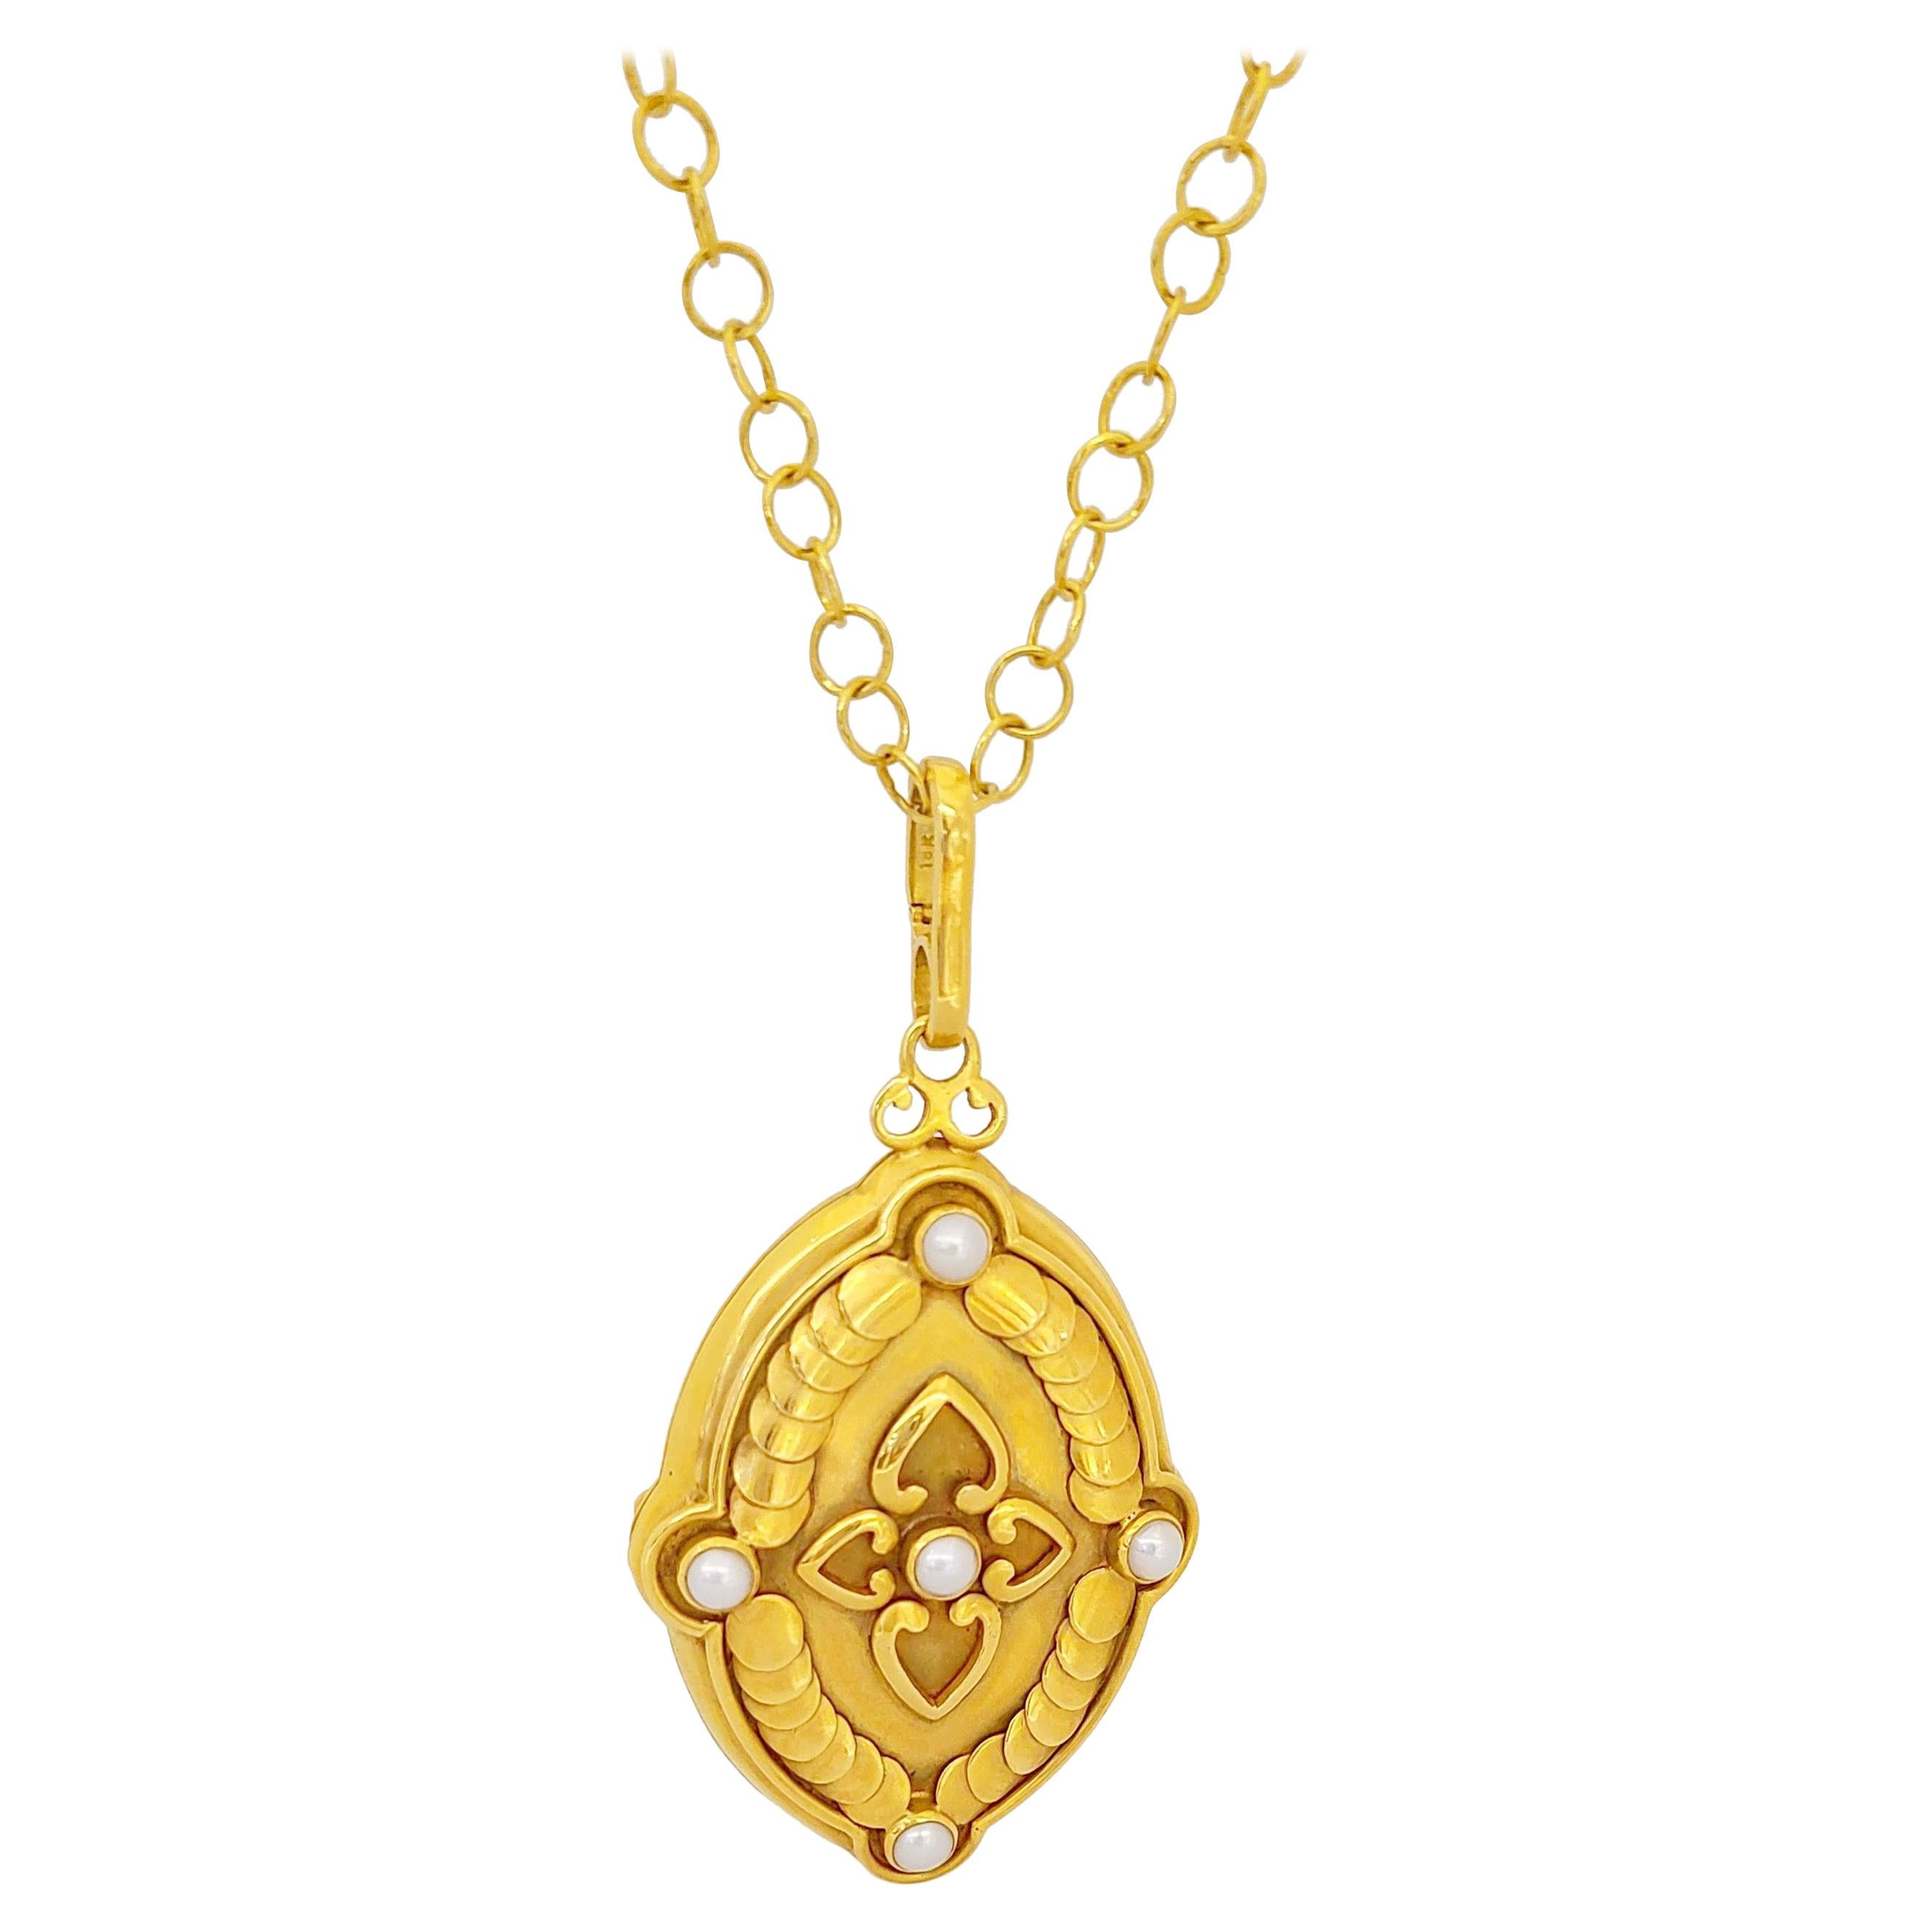 Julie Baker 18 Karat Yellow Gold Locket with Pearls with Open Link Chain